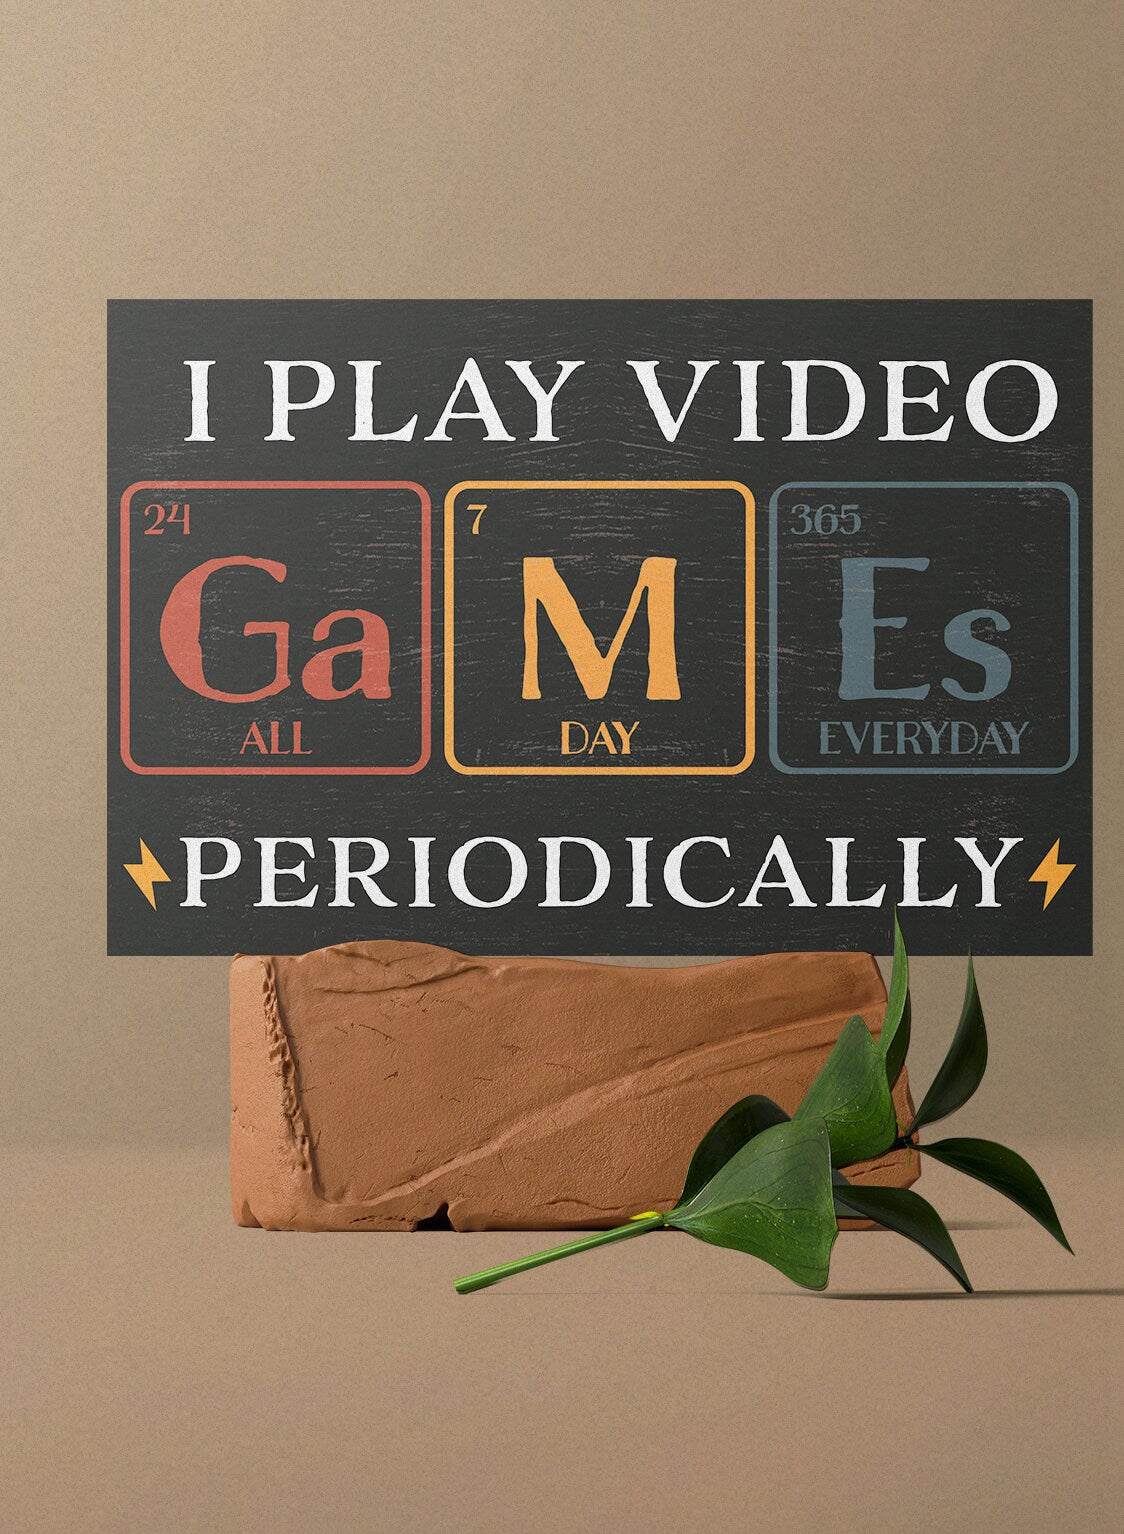 Show Your Gamer Side: 7.5in x 5in Wooden Wall Decor Sign - "I Play Video Games Periodically" with Element Blocks - Creative & Fun